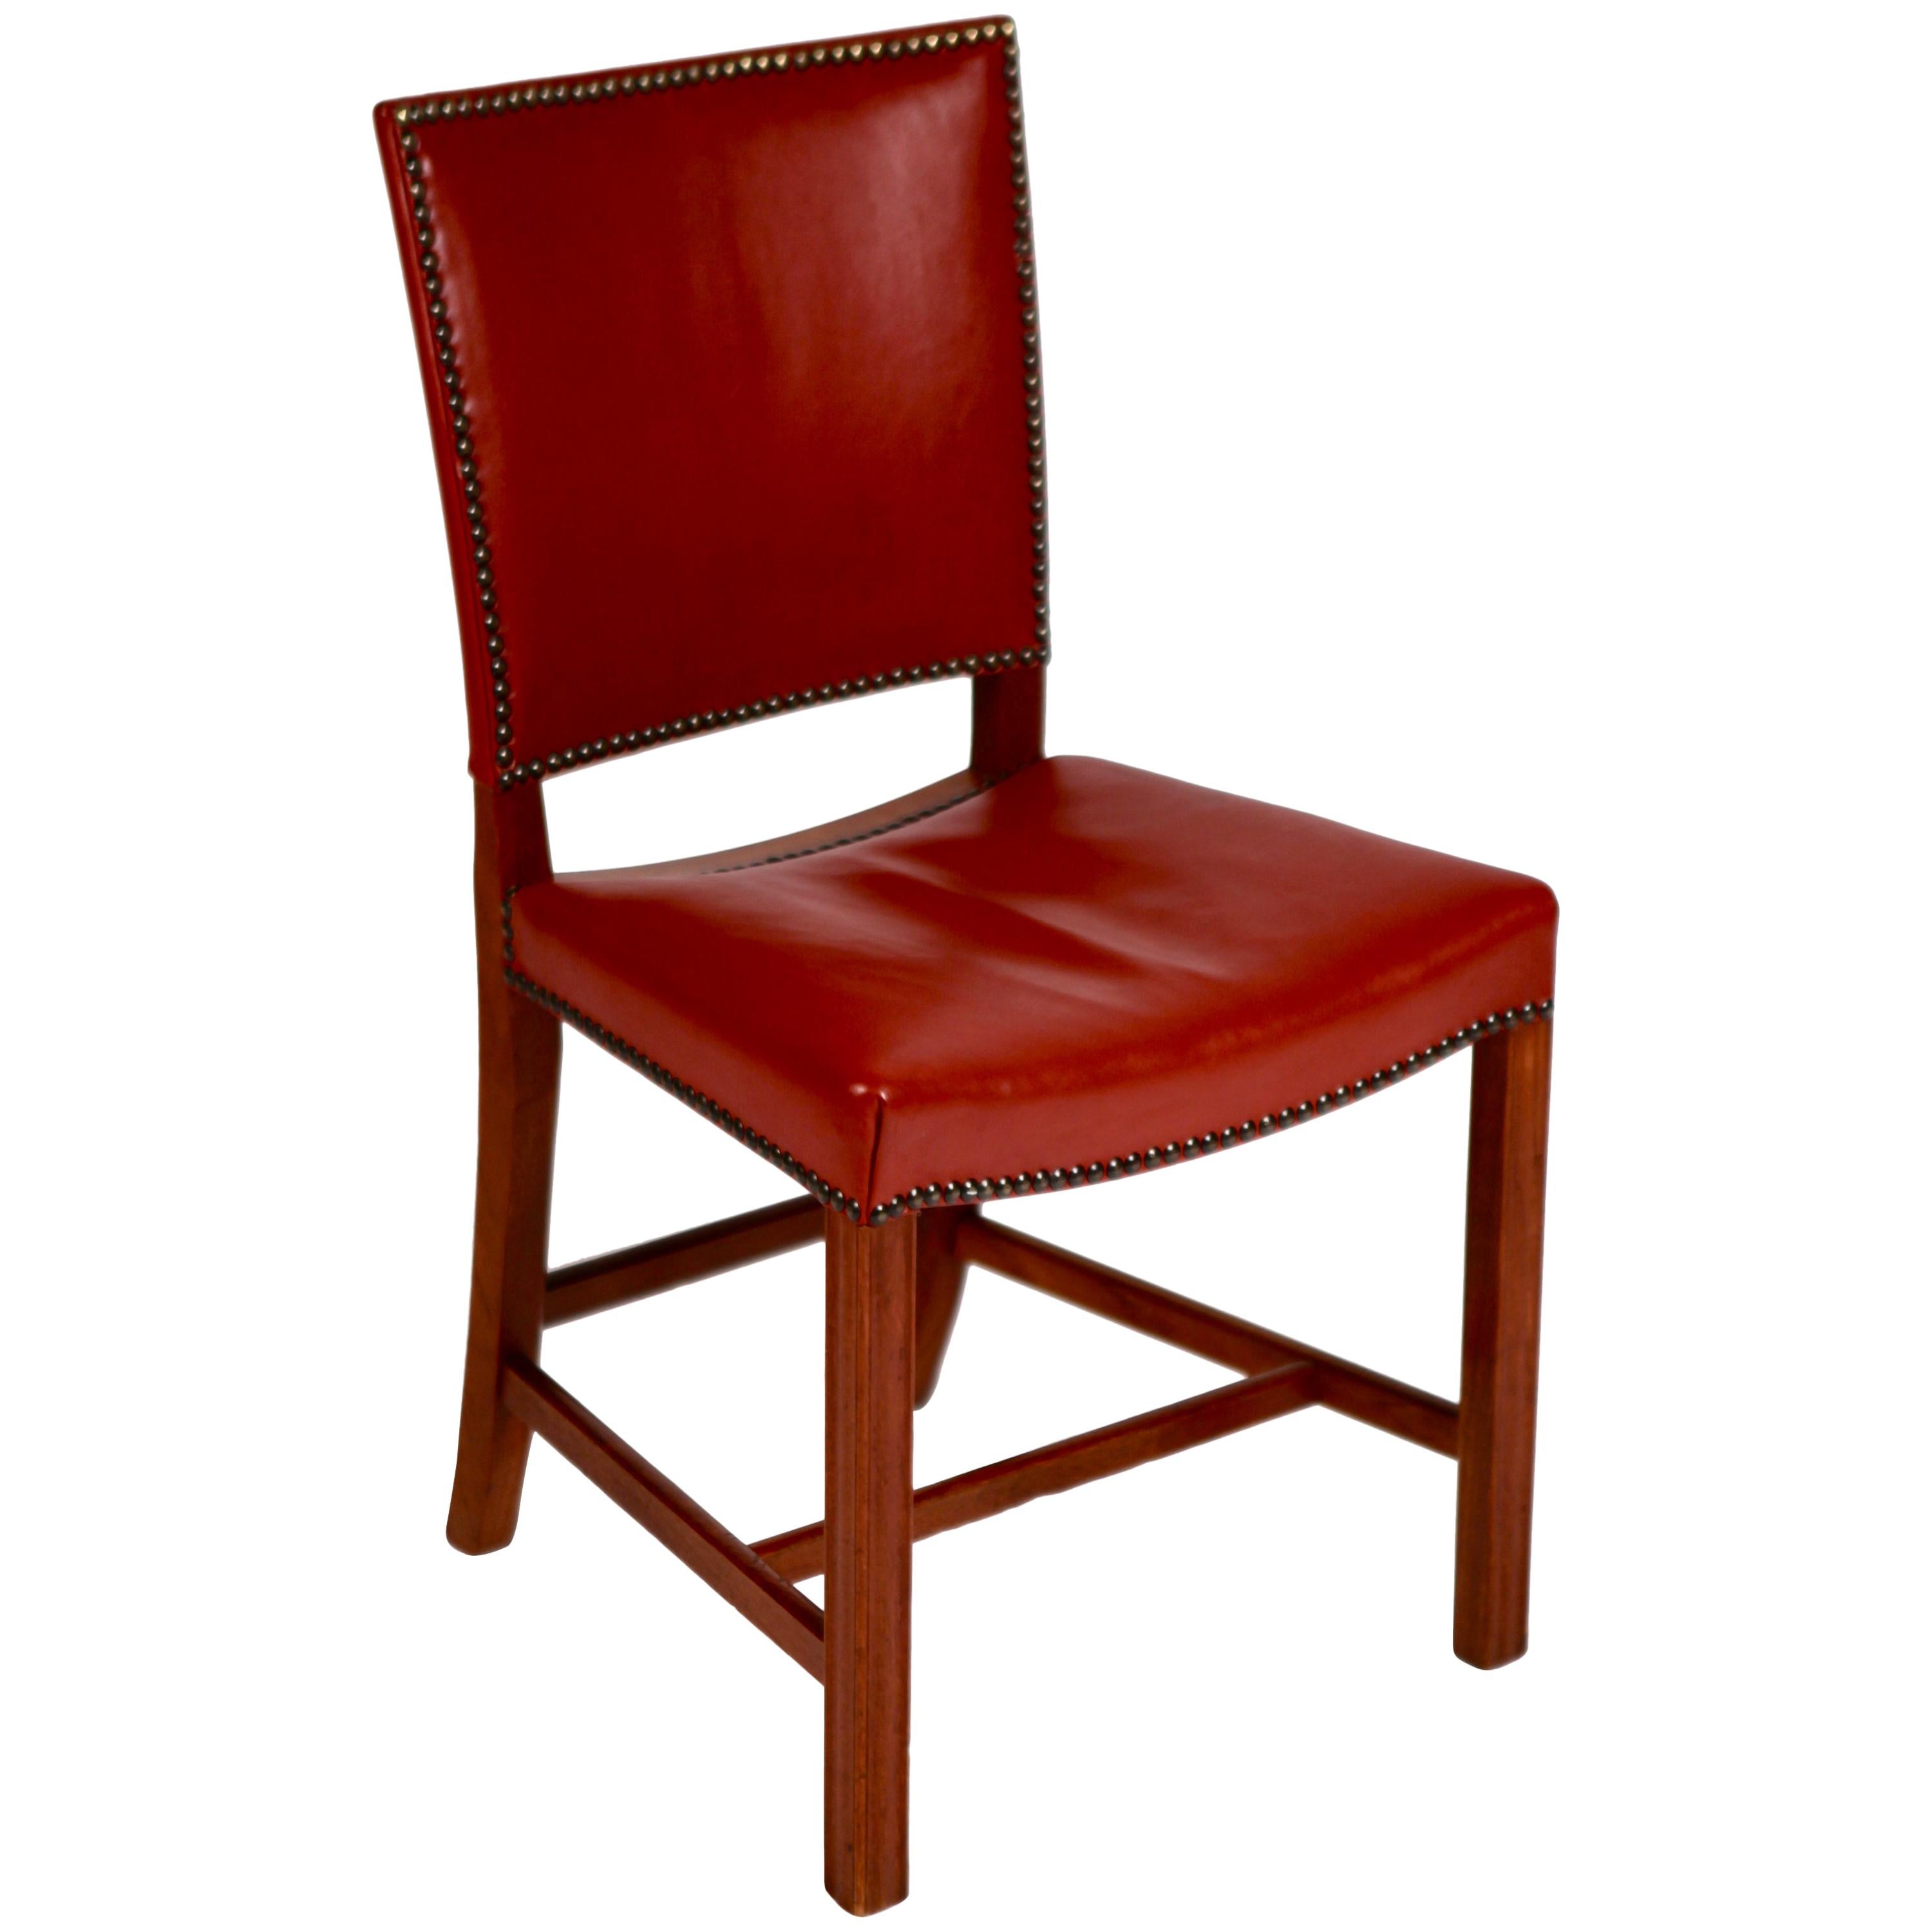 Kaare Klint, Barcelona Chair, Red Leather and Mahogany, Denmark, 1940s